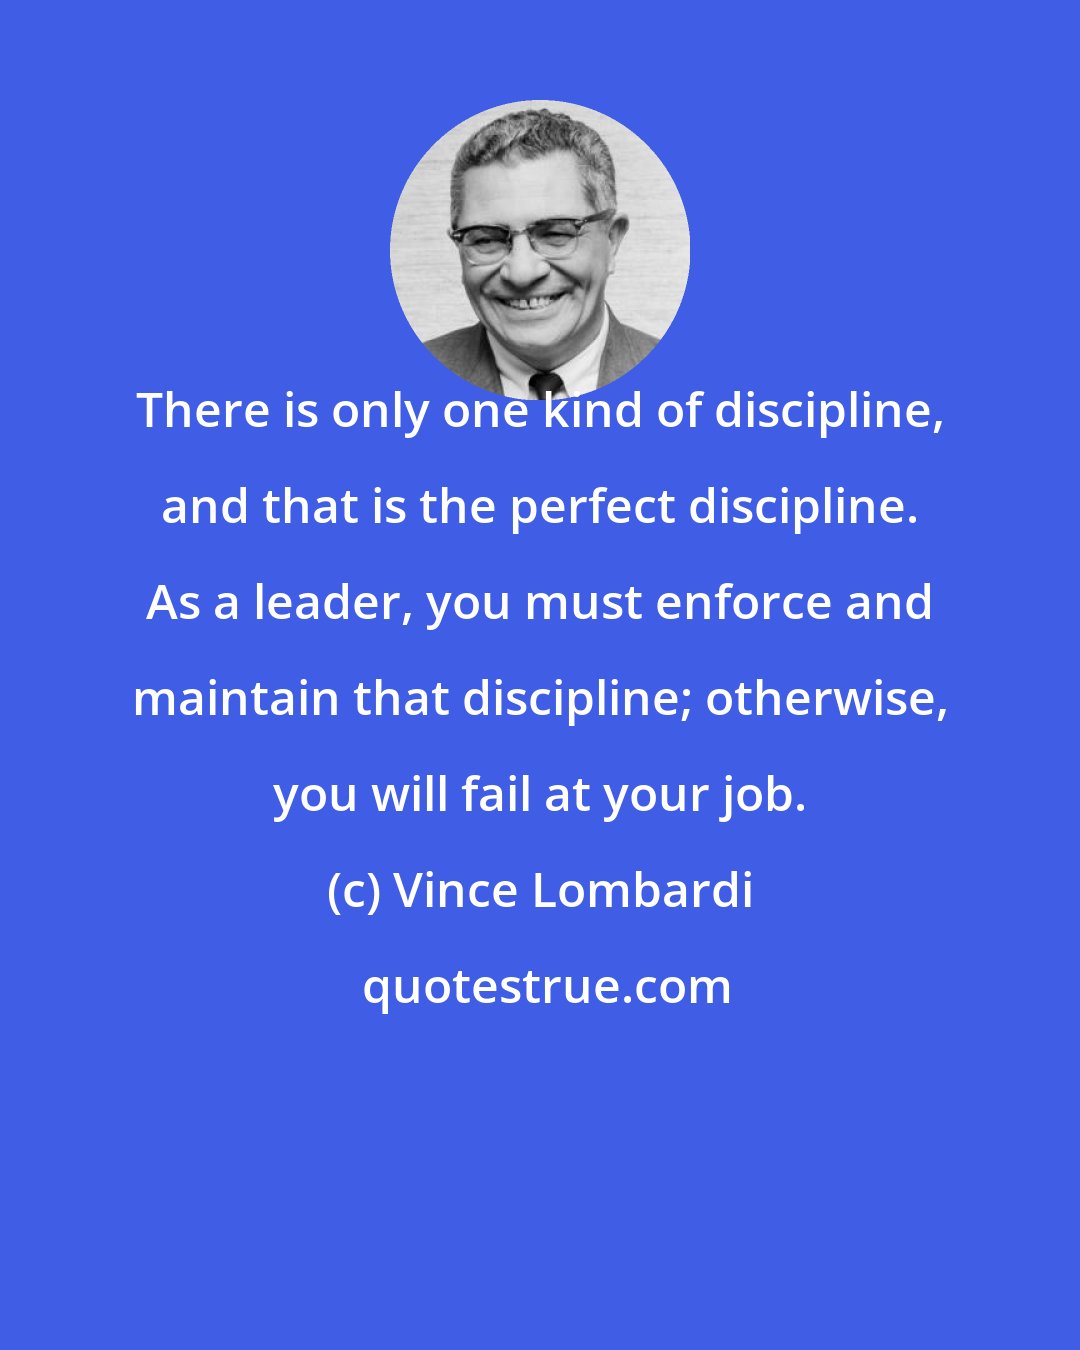 Vince Lombardi: There is only one kind of discipline, and that is the perfect discipline. As a leader, you must enforce and maintain that discipline; otherwise, you will fail at your job.